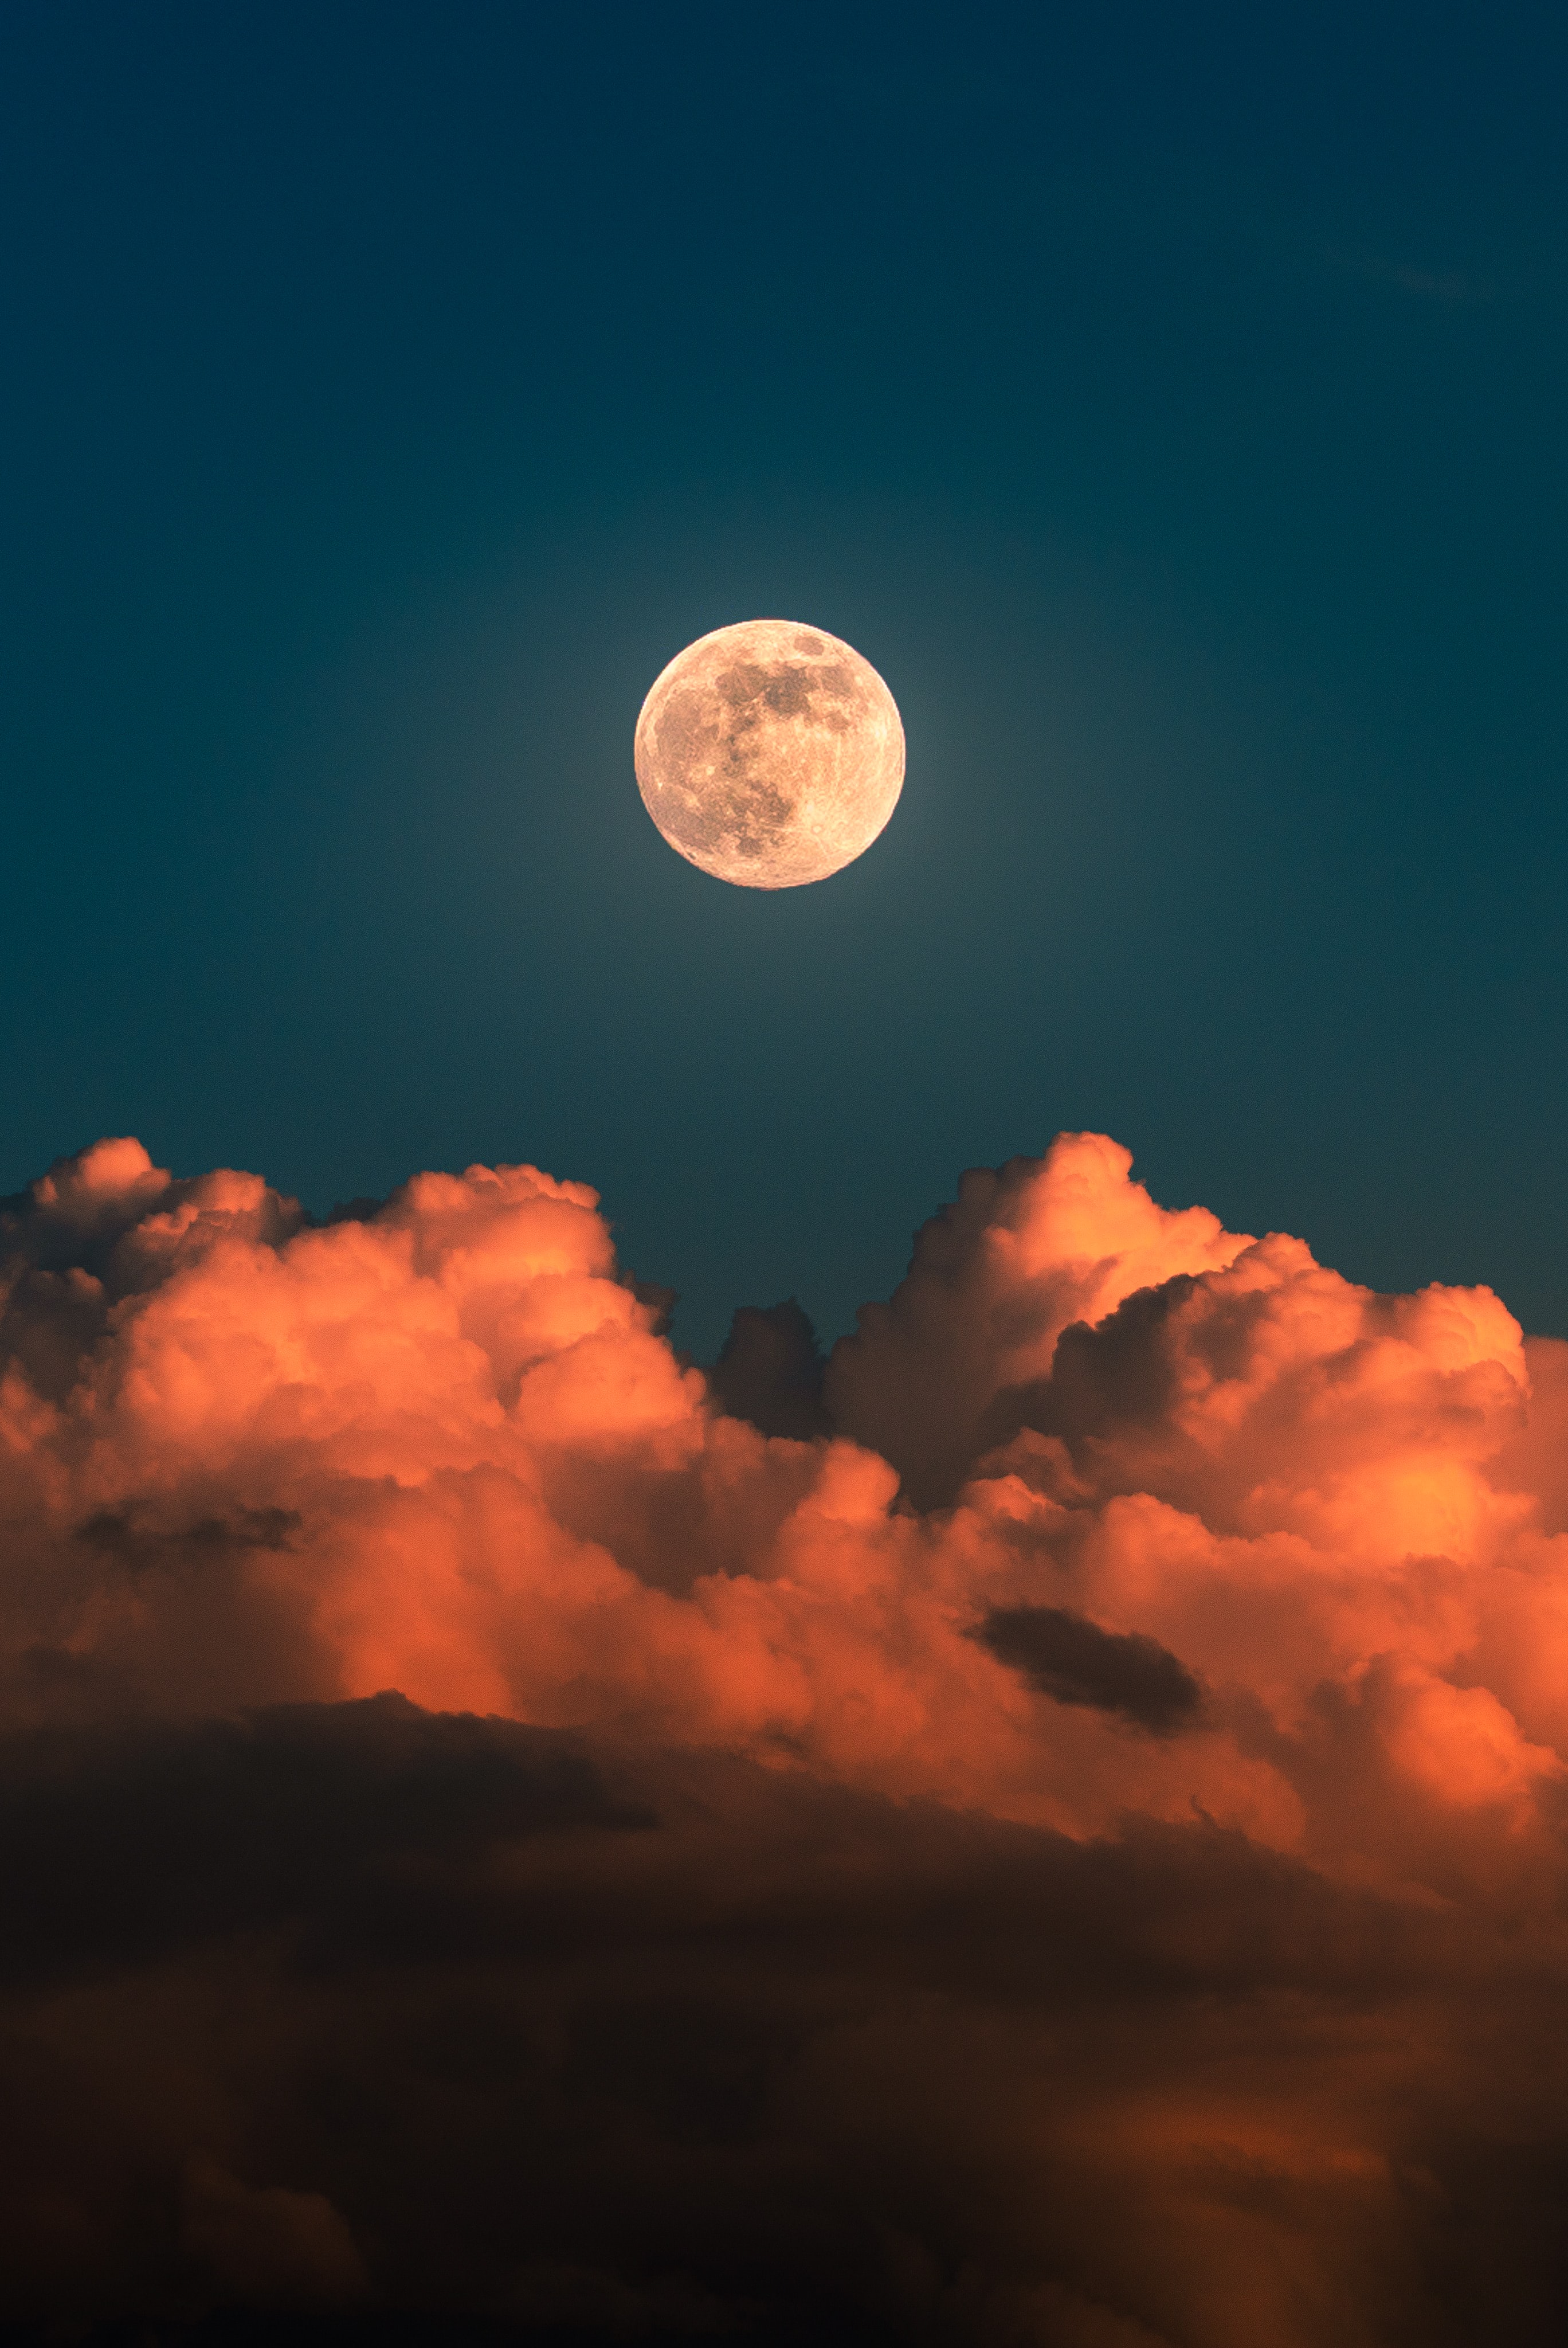 moon, nature, sky, clouds, full moon